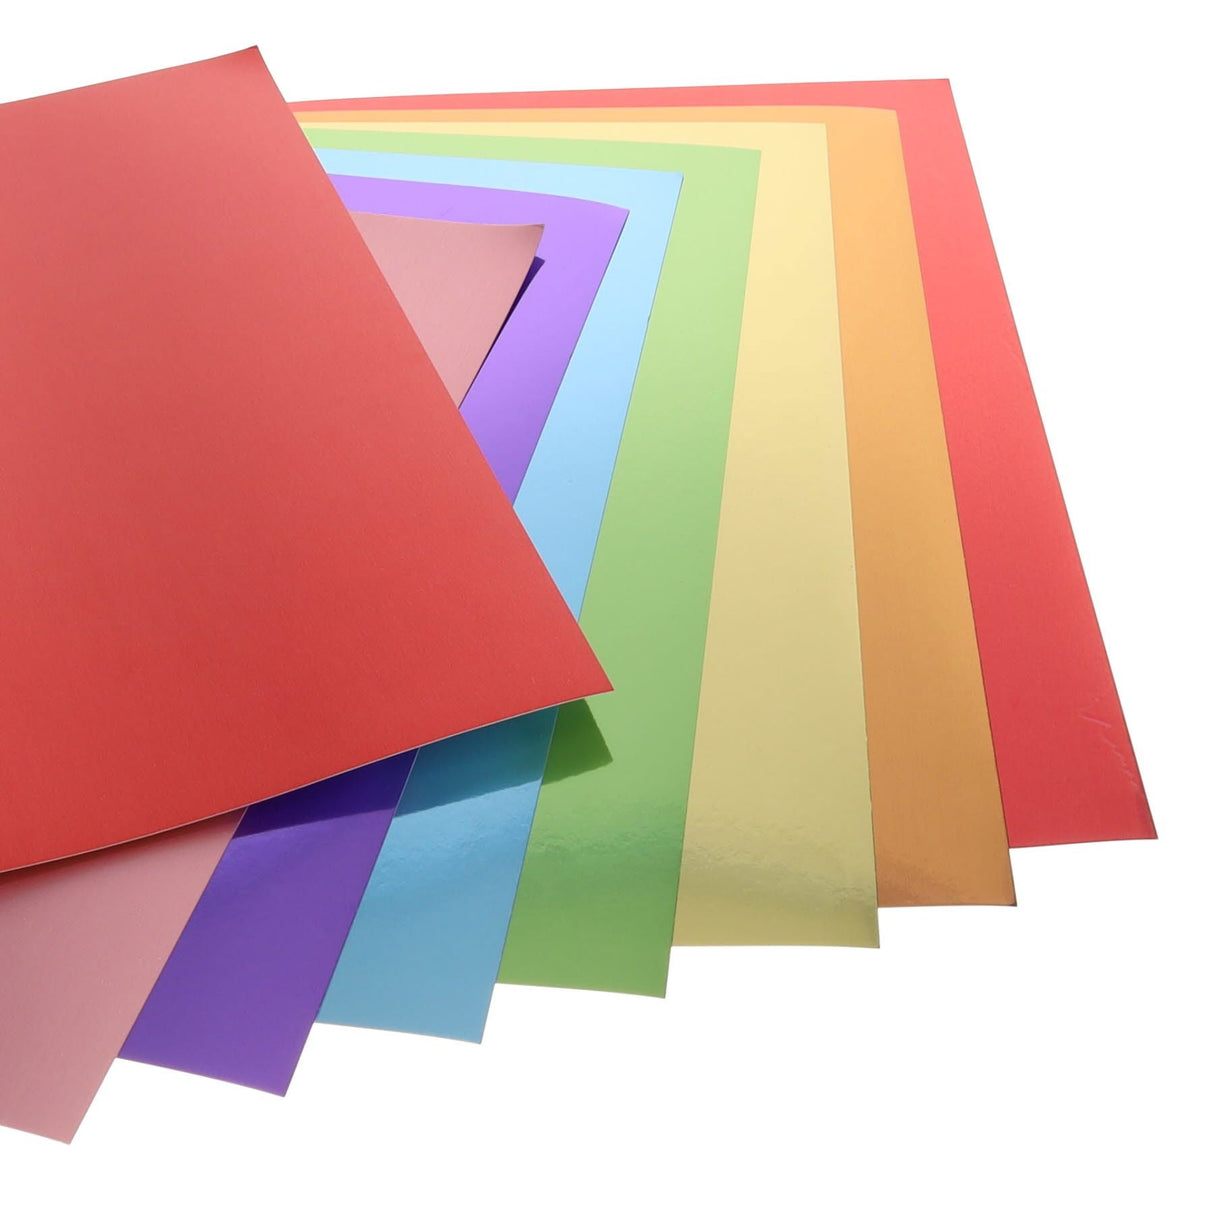 Premier Activity A4 Foil Card - 16 Sheets - 220gsm - Shades Of The Rainbow | Stationery Shop UK